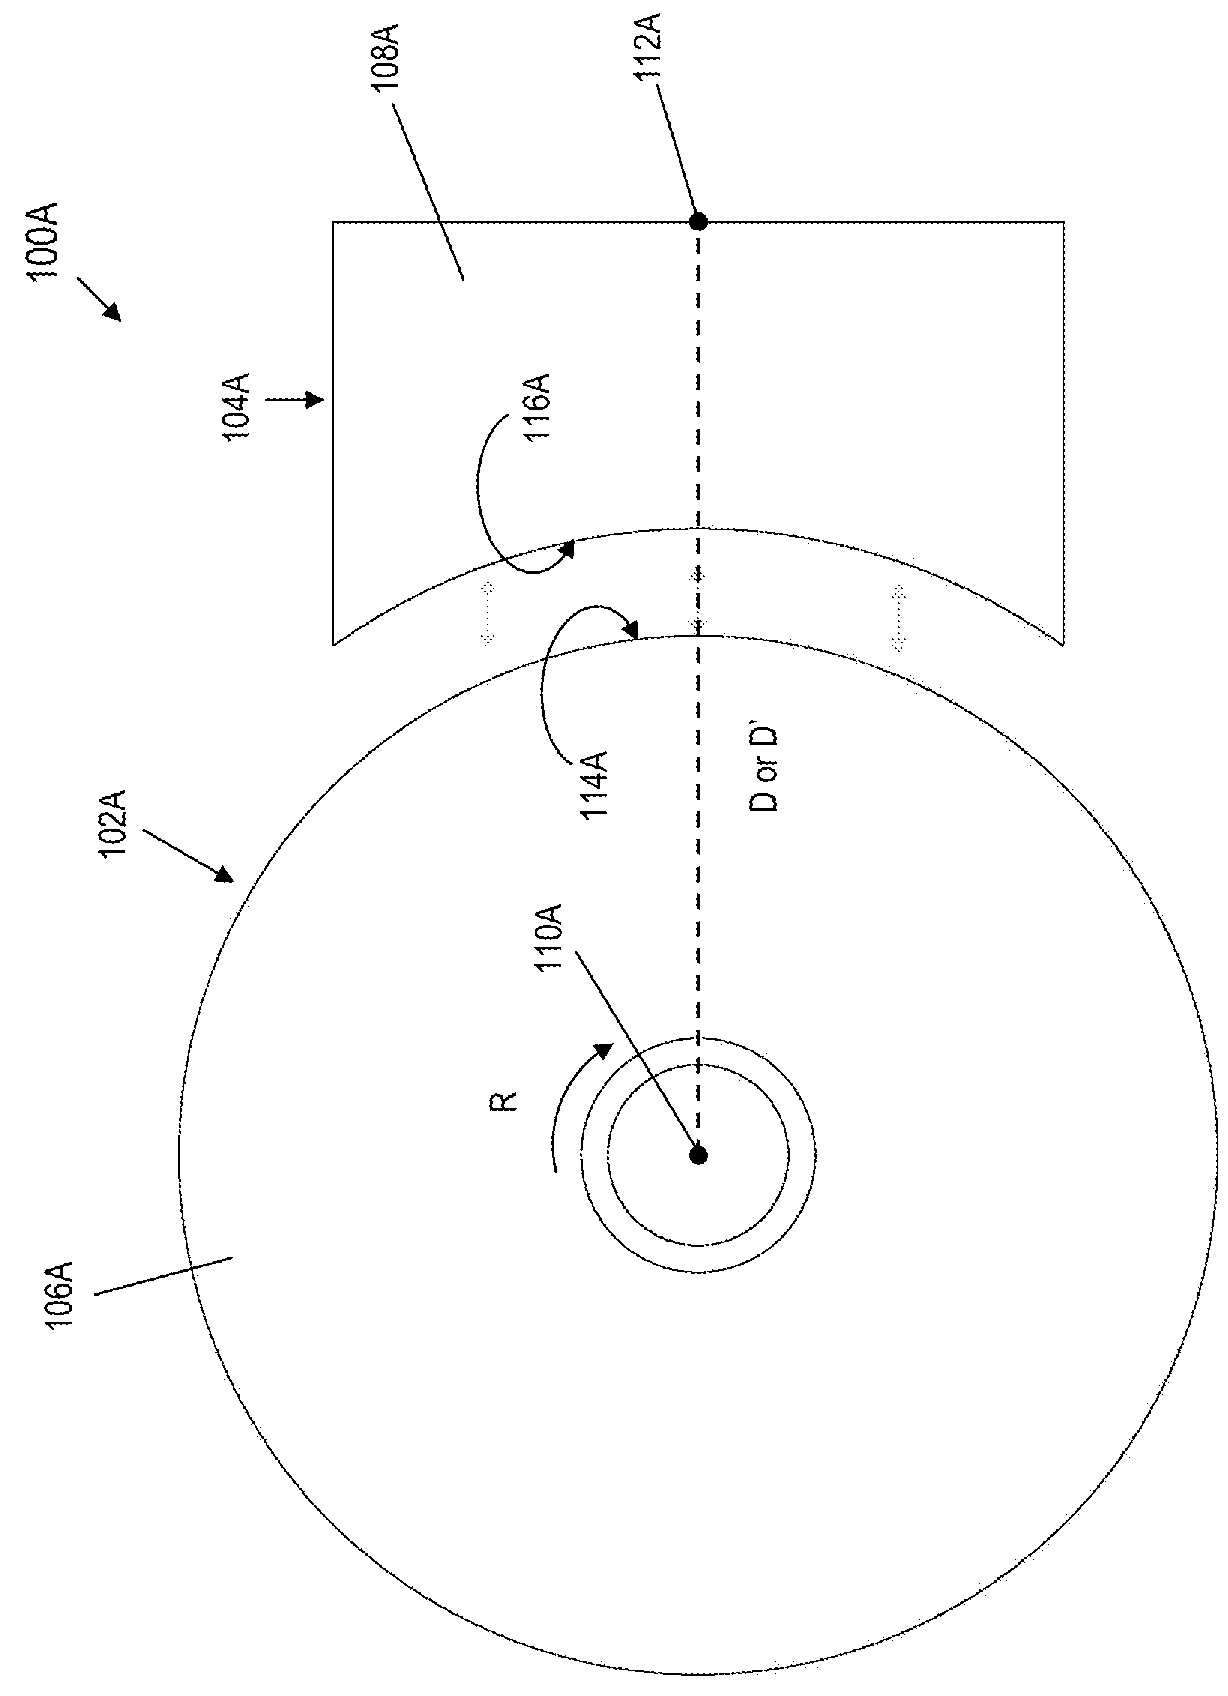 Eddy current braking device for rotary systems